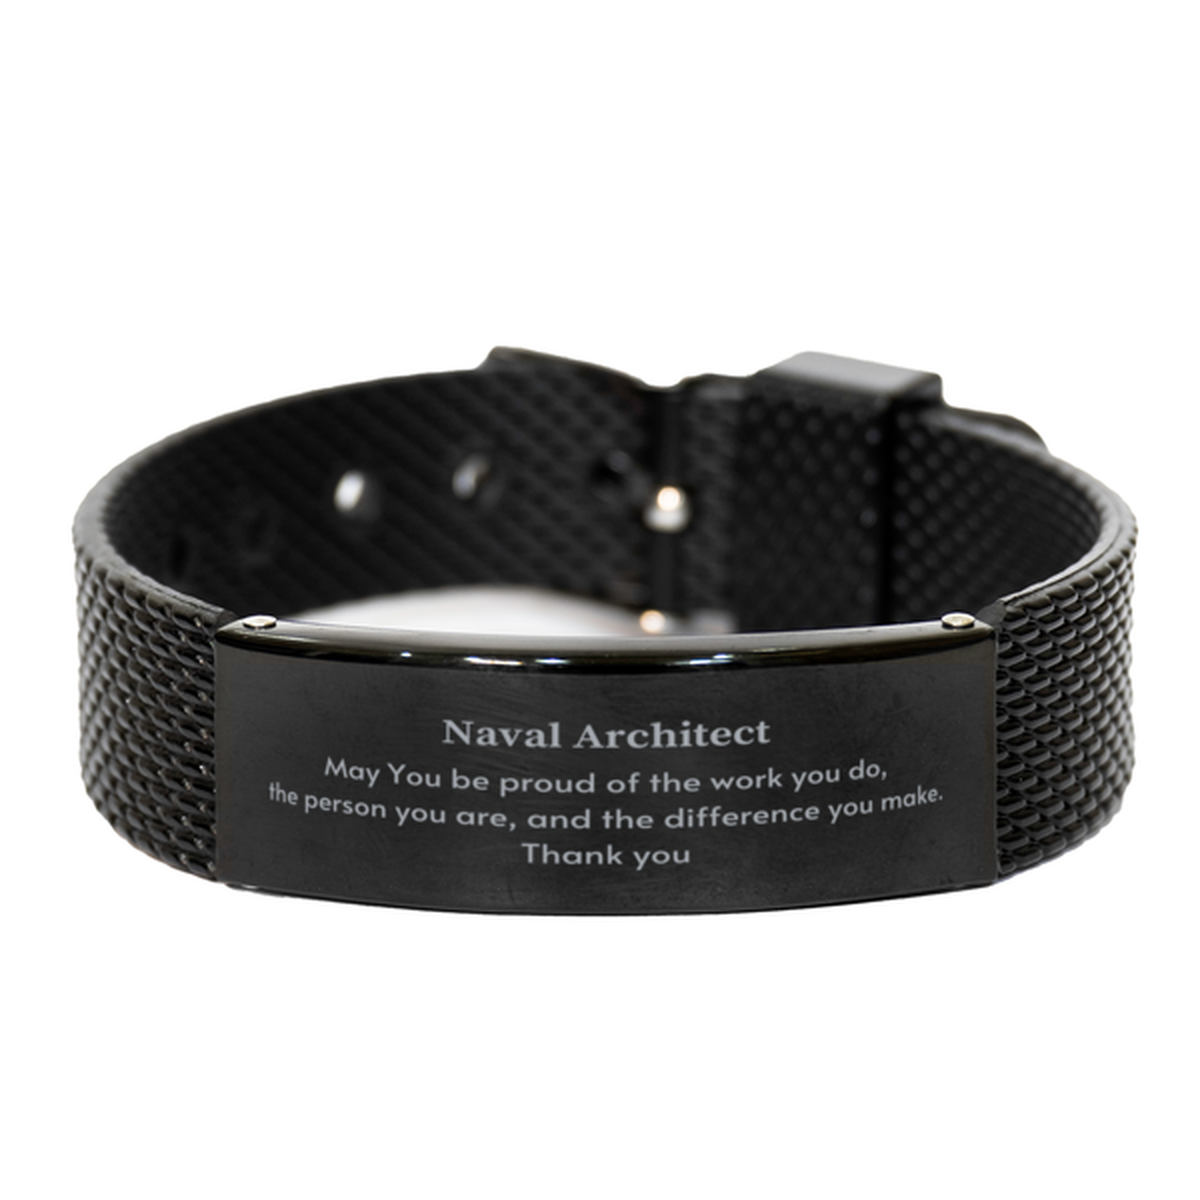 Heartwarming Black Shark Mesh Bracelet Retirement Coworkers Gifts for Naval Architect, Naval Architect May You be proud of the work you do, the person you are Gifts for Boss Men Women Friends